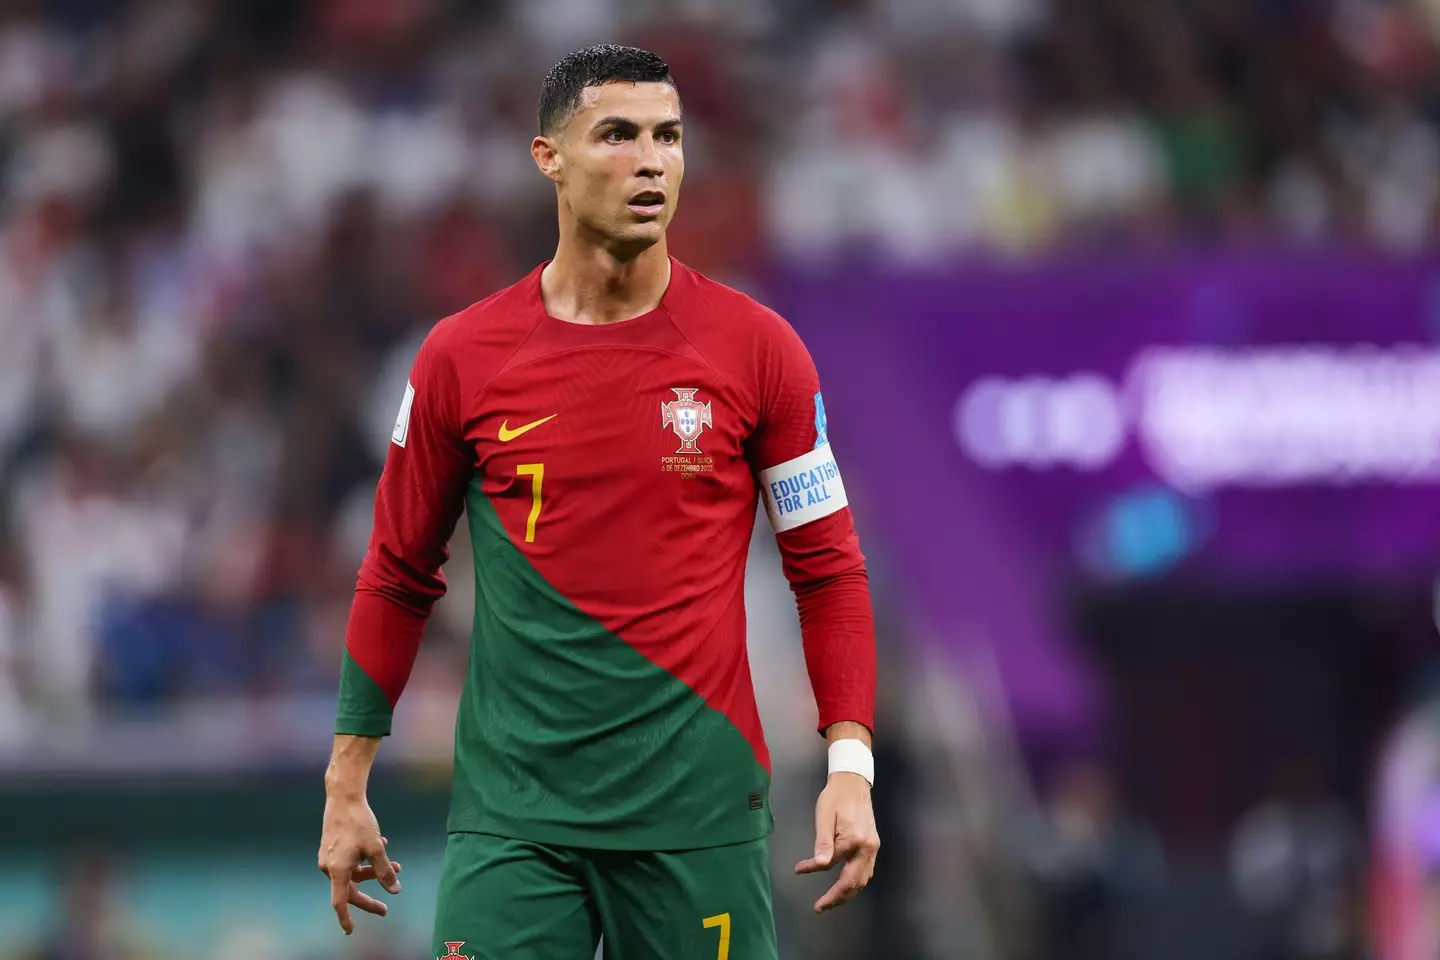 Ronaldo was last in action during the World Cup, helping Portugal to the quarter-finals. (Image